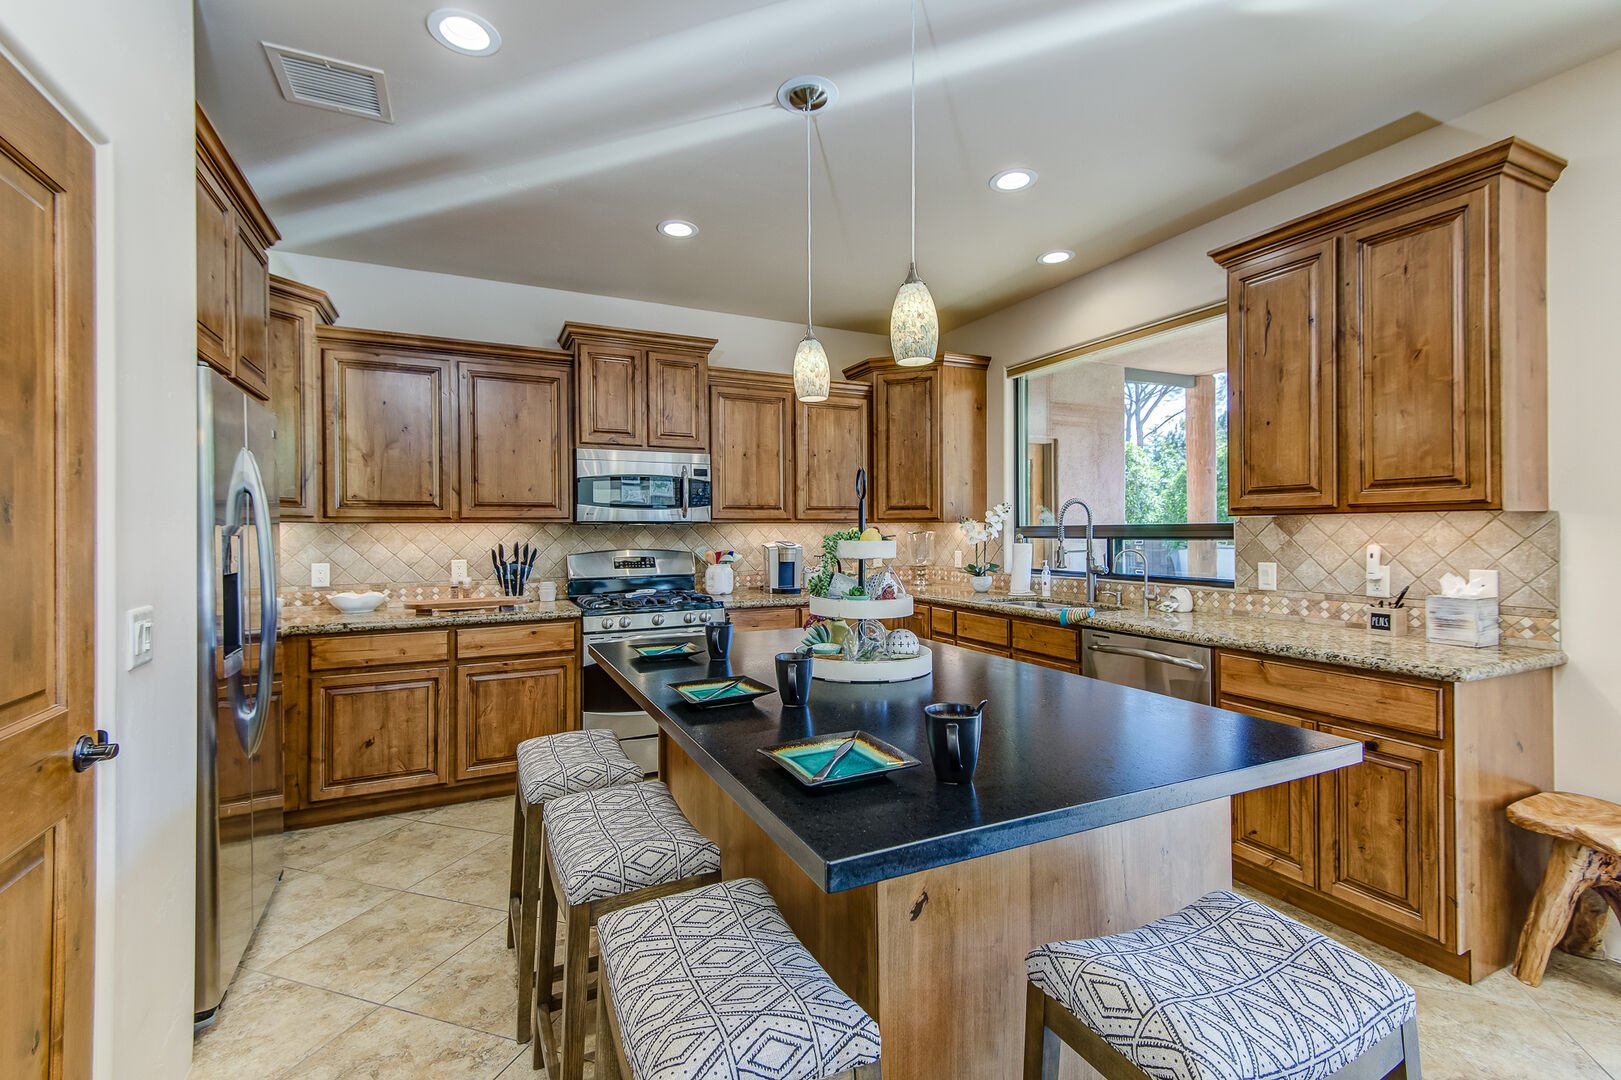 Plenty of Counter Space Including a Large Center Island with Seating for Four